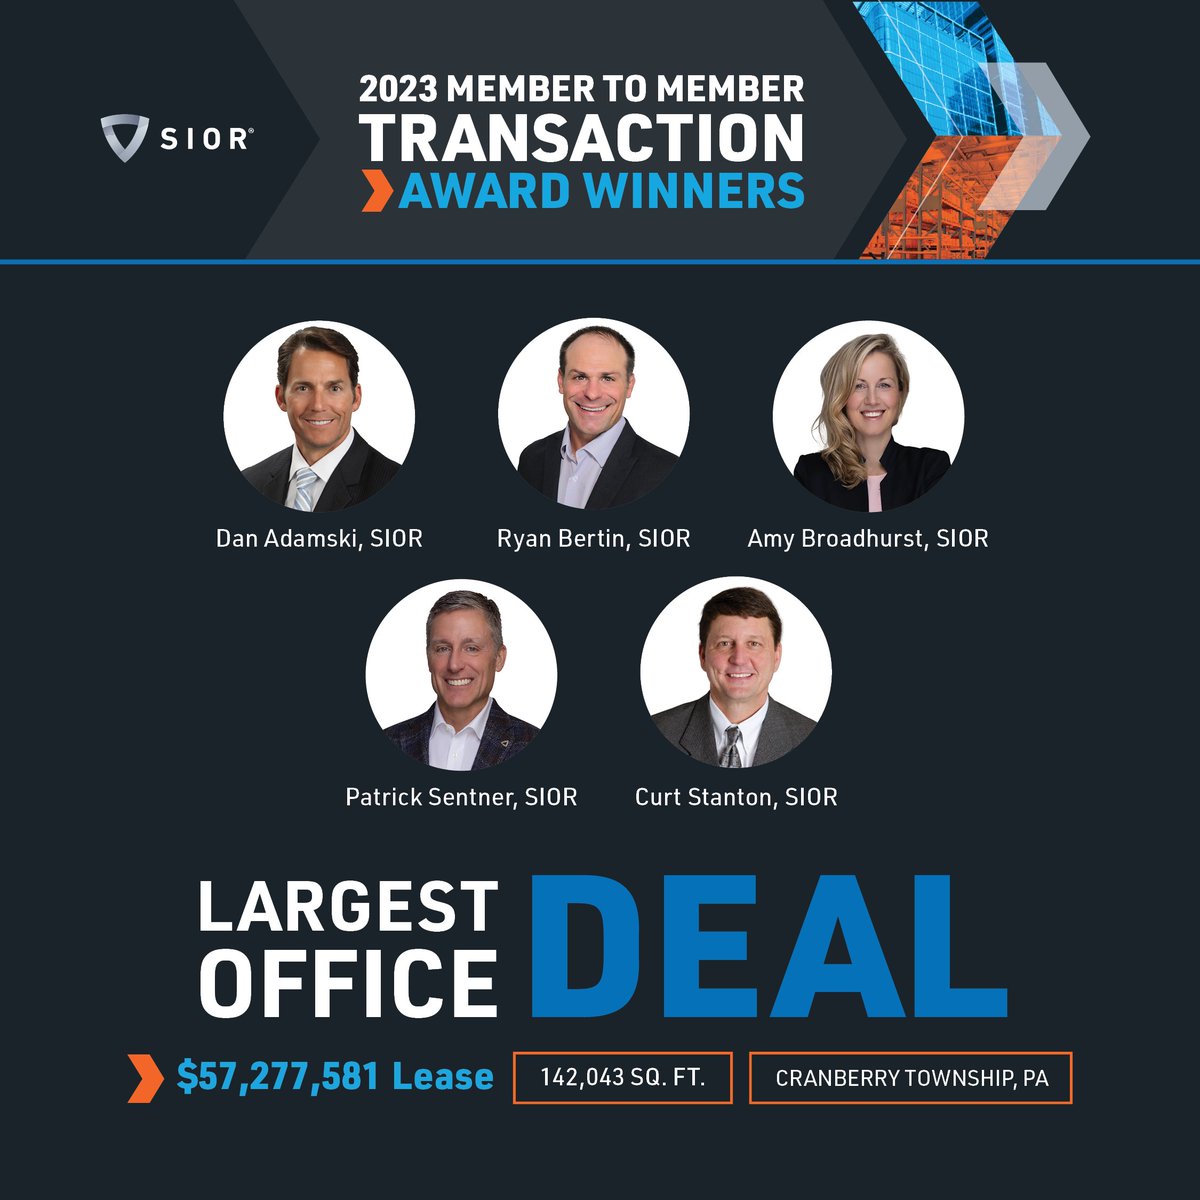 Congratulations to Dan Adamski, SIOR; Ryan Bertin, SIOR; @AmyBroadhur, SIOR; @PatrickSentner, SIOR; & Curt Stanton, SIOR, for landing the Top 2023 Office Deal! This dream team worked together to secure a $57M office lease in PA. hubs.ly/Q02xdbp00